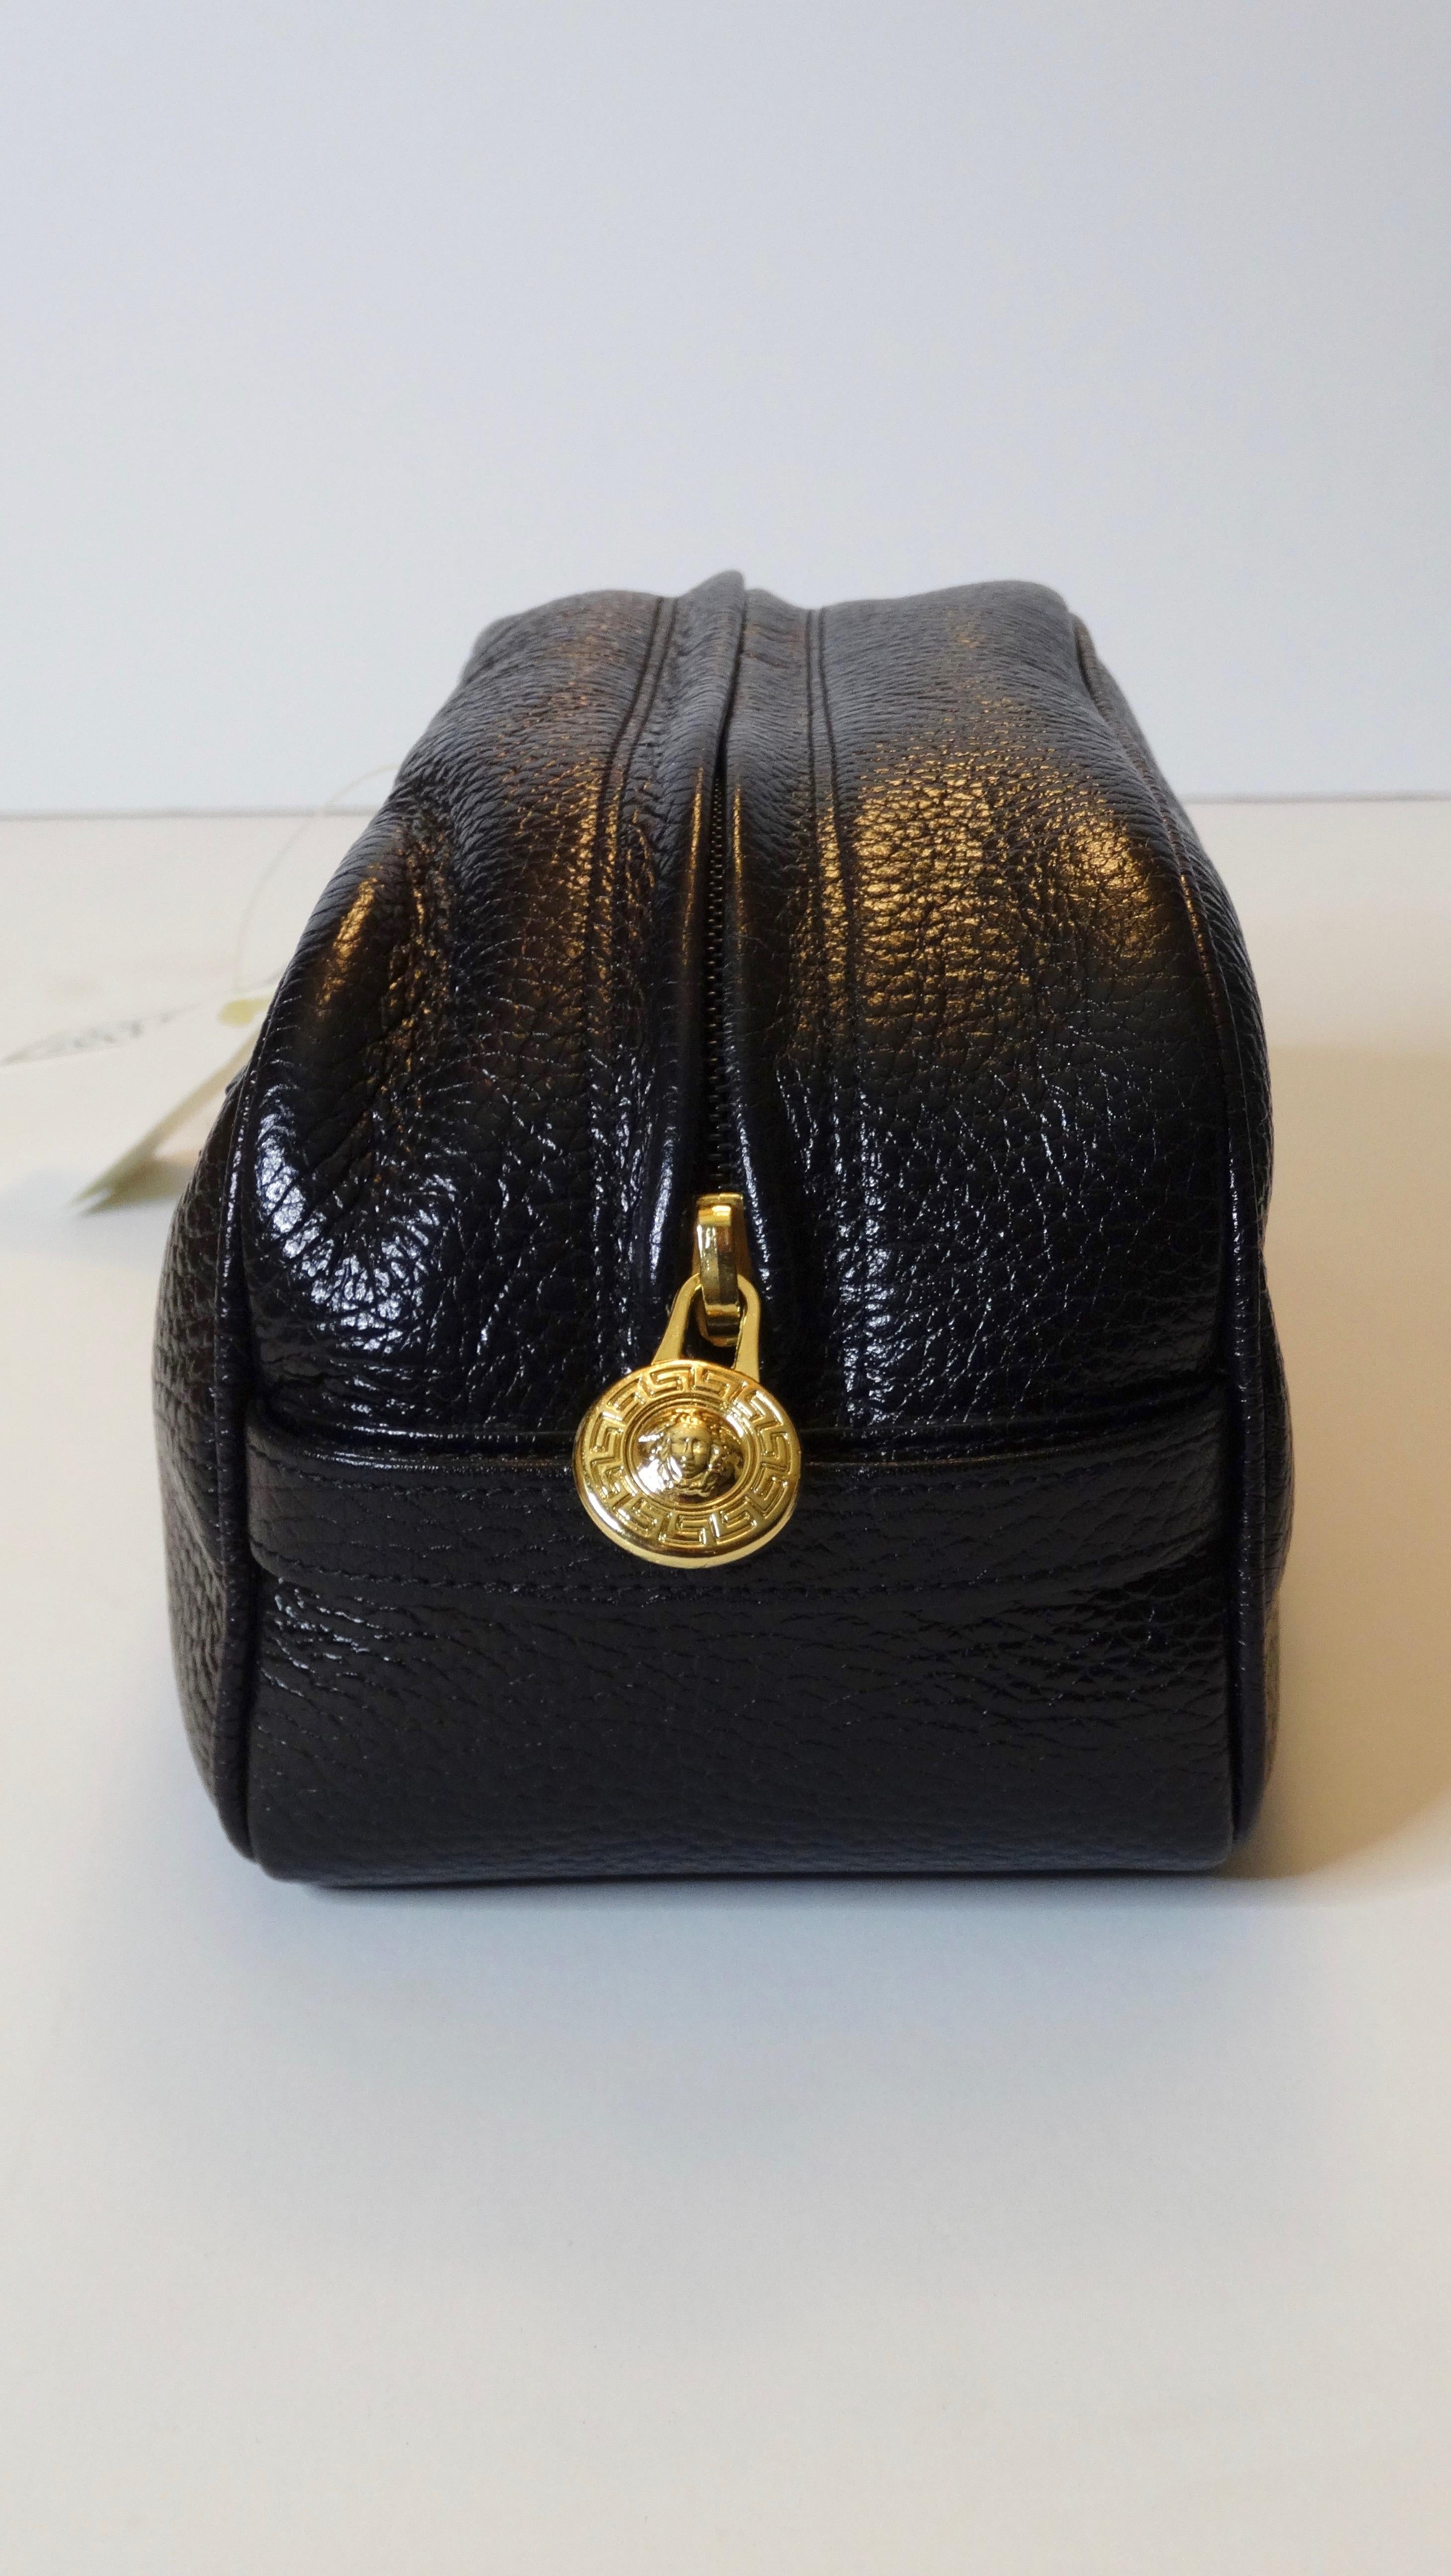 Women's or Men's Gianni Versace 1990s Black Leather Cosmetic Bag